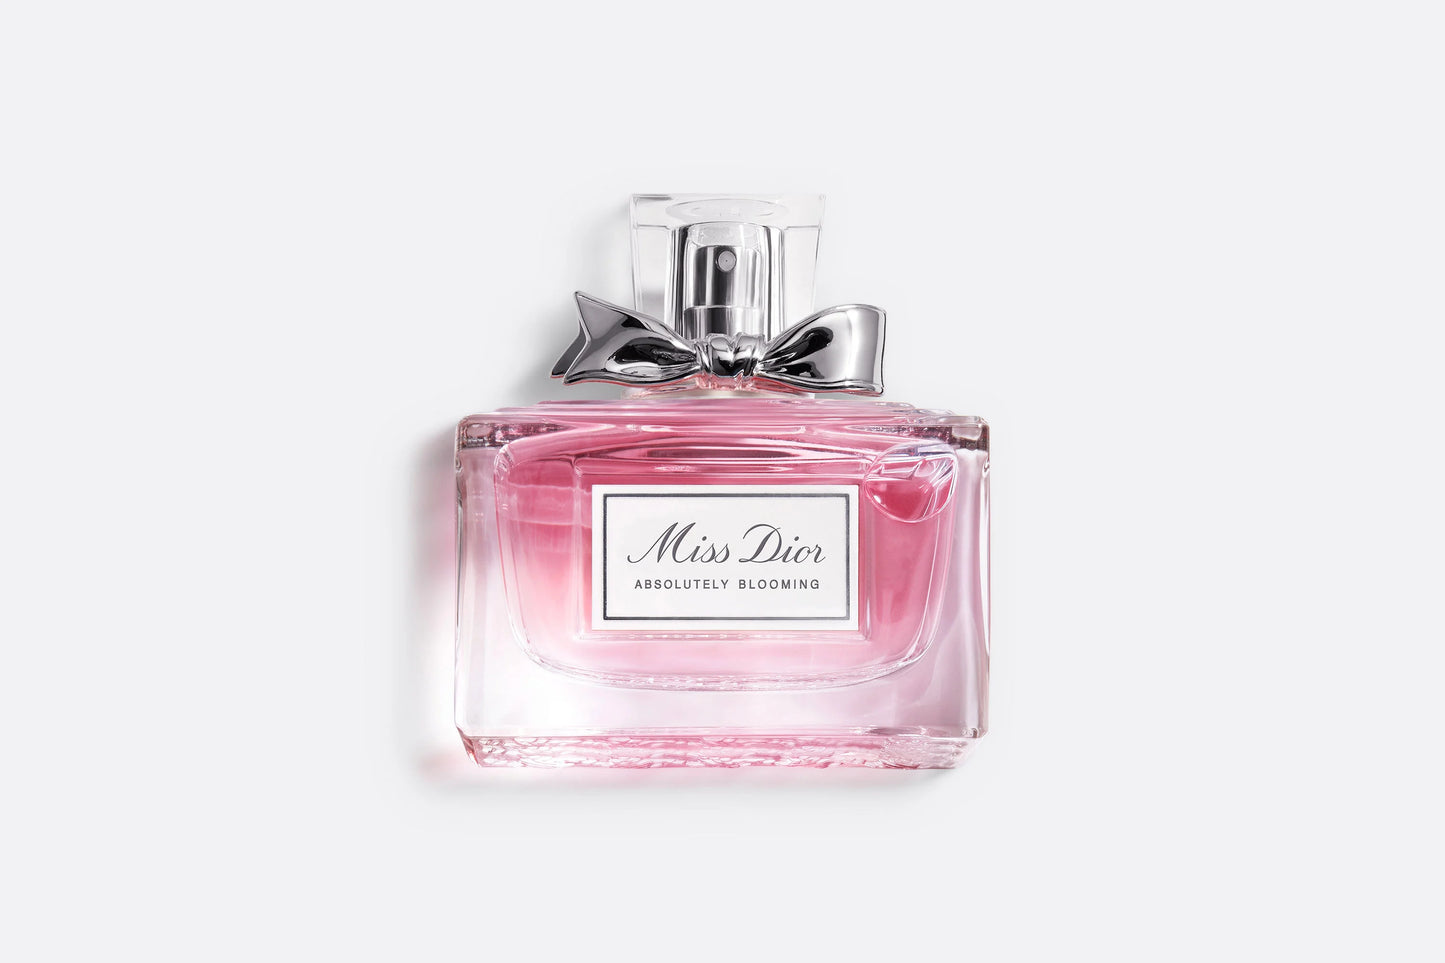 Miss Dior Absolutely Blooming - Perfume Planet 